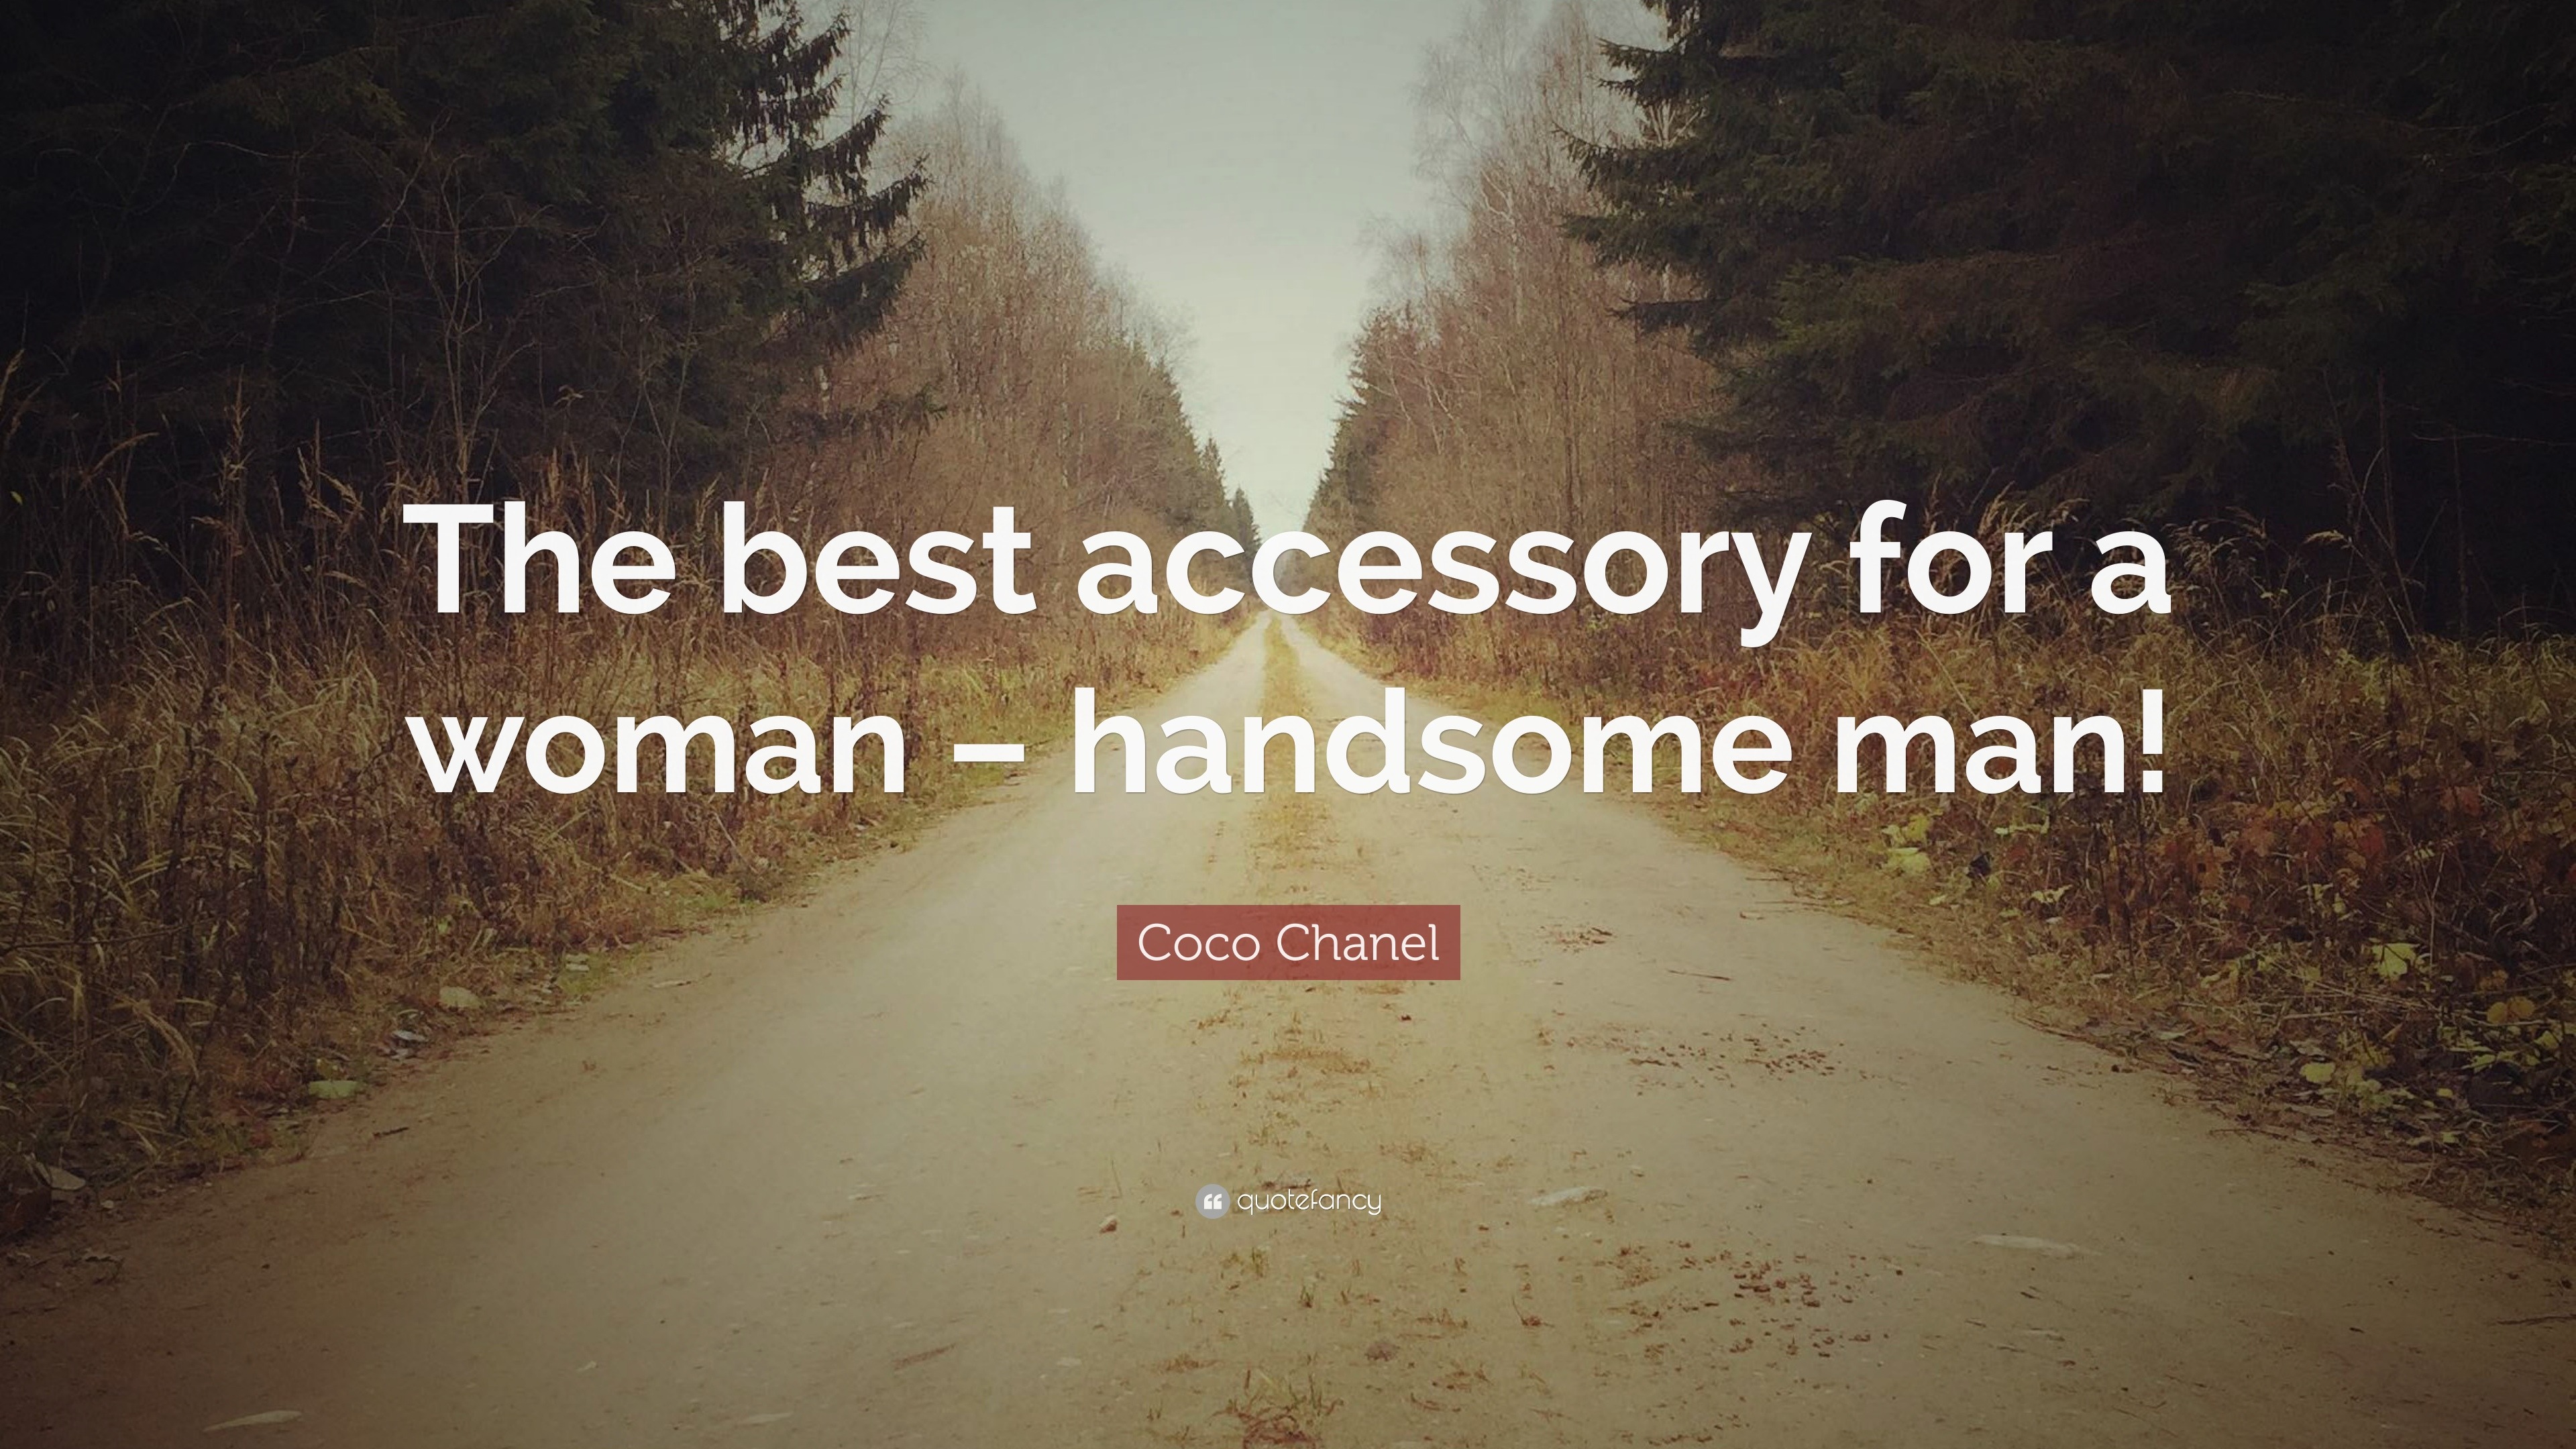 Coco Chanel Quote: “The best accessory for a woman – handsome man!”